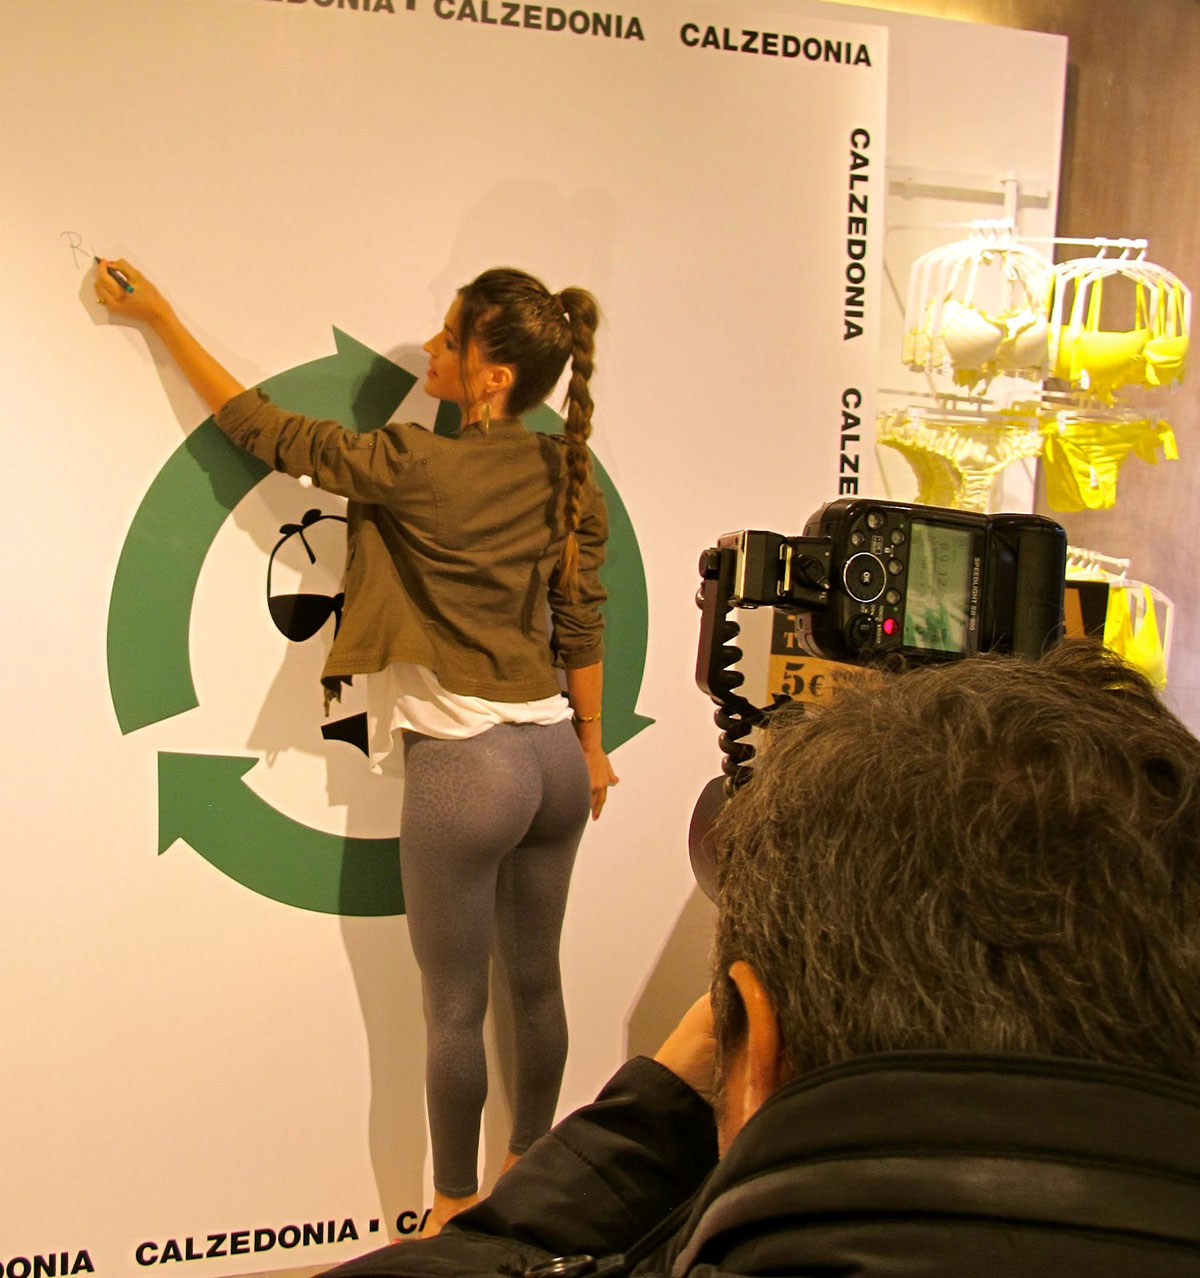 Malena Costa Calzedonia Recycled Campaign Photocall Madrid